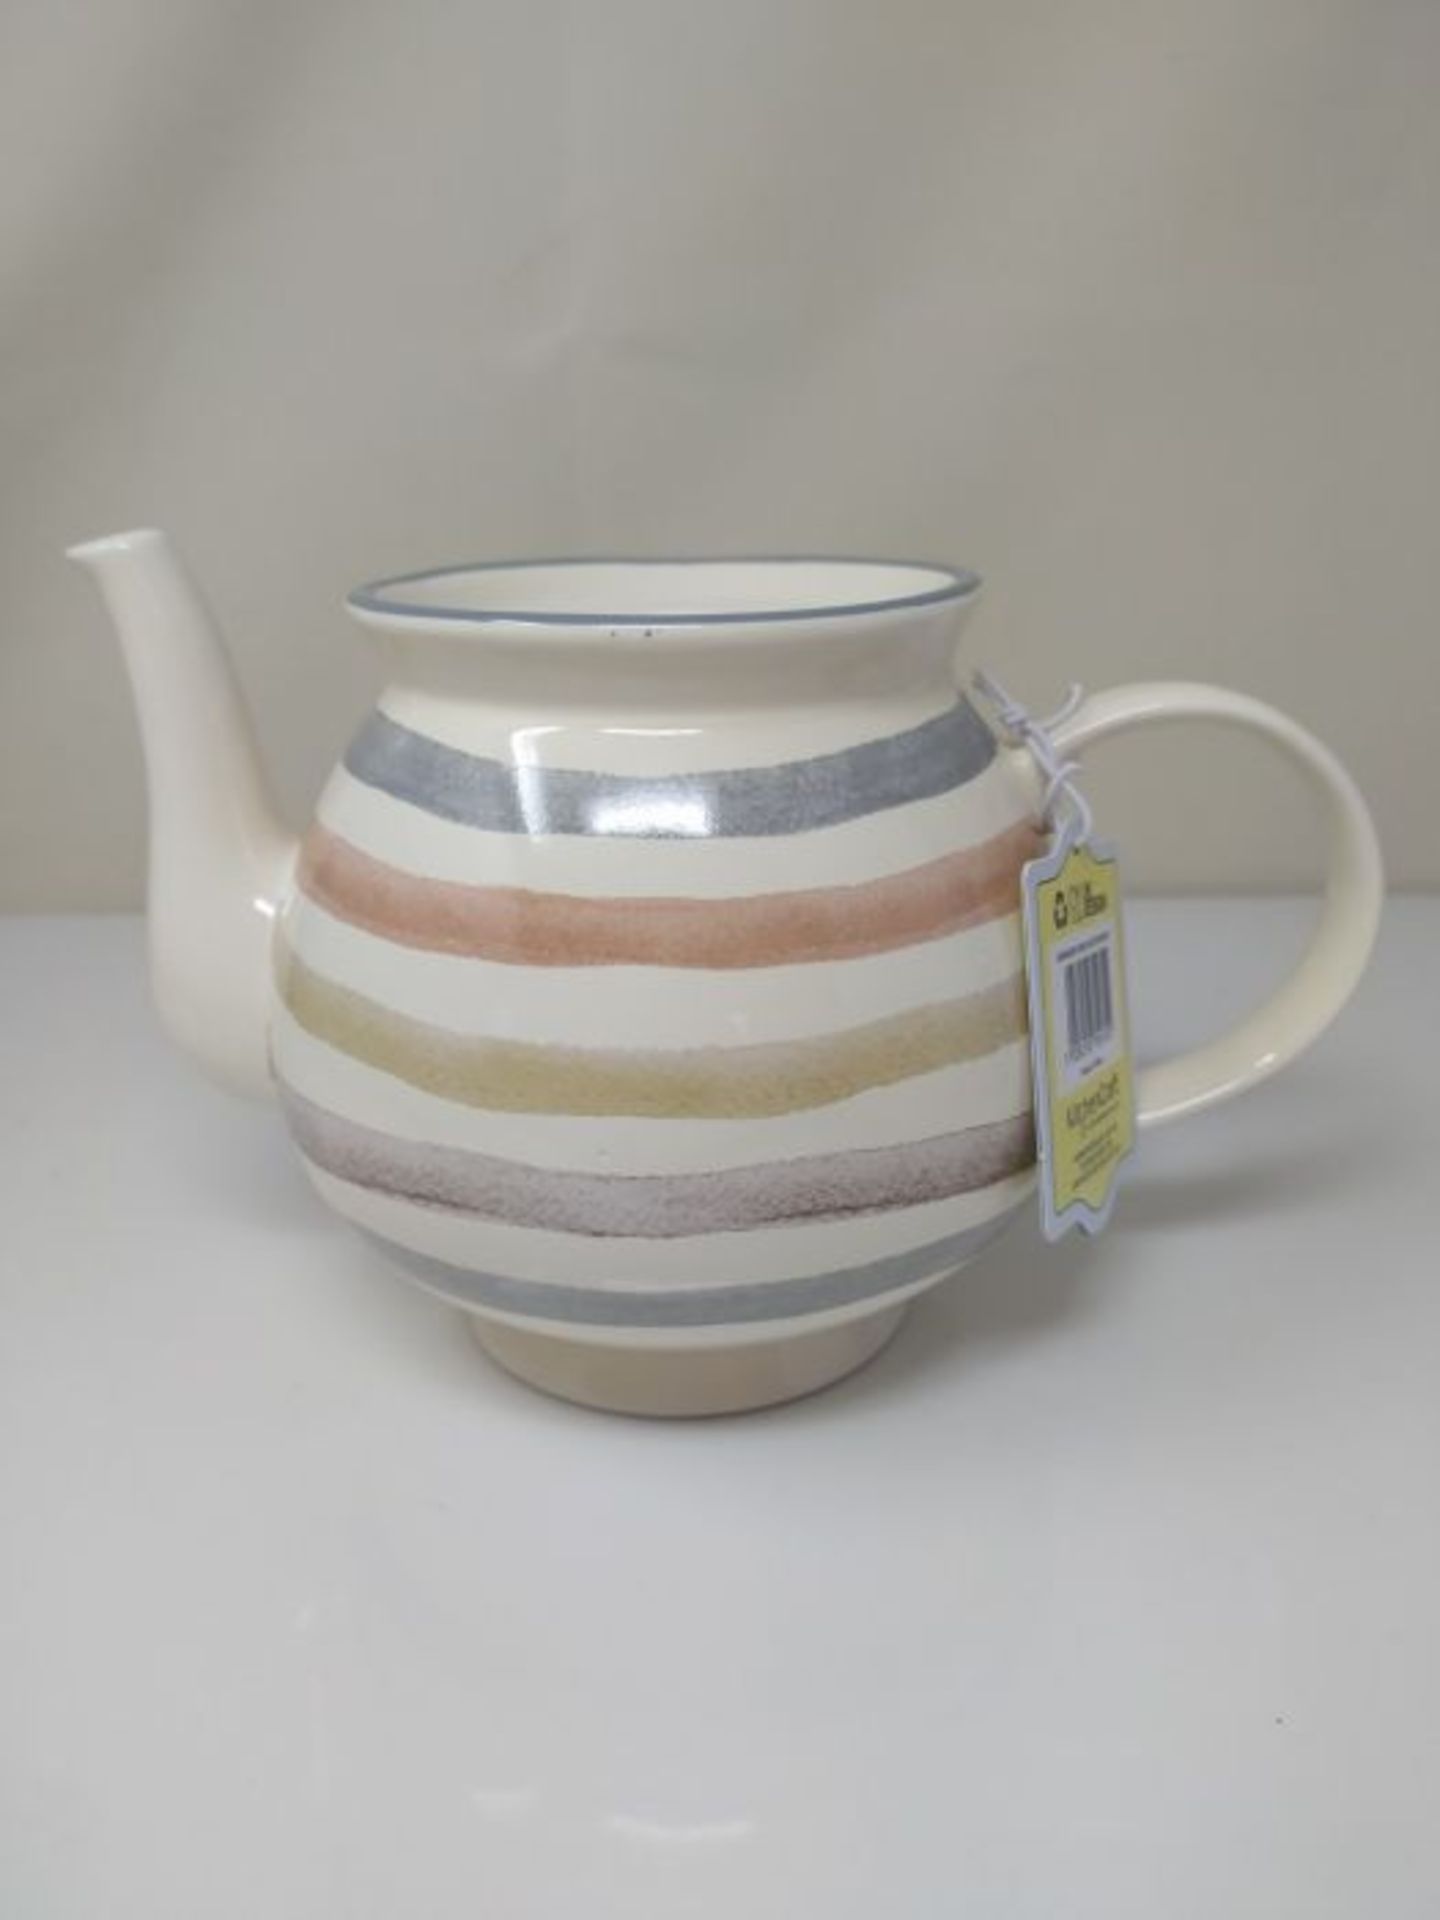 KitchenCraft Classic Collection 6-Cup Ceramic Vintage-Style Teapot, 1.4 L (2.5 pts) ? - Image 2 of 2